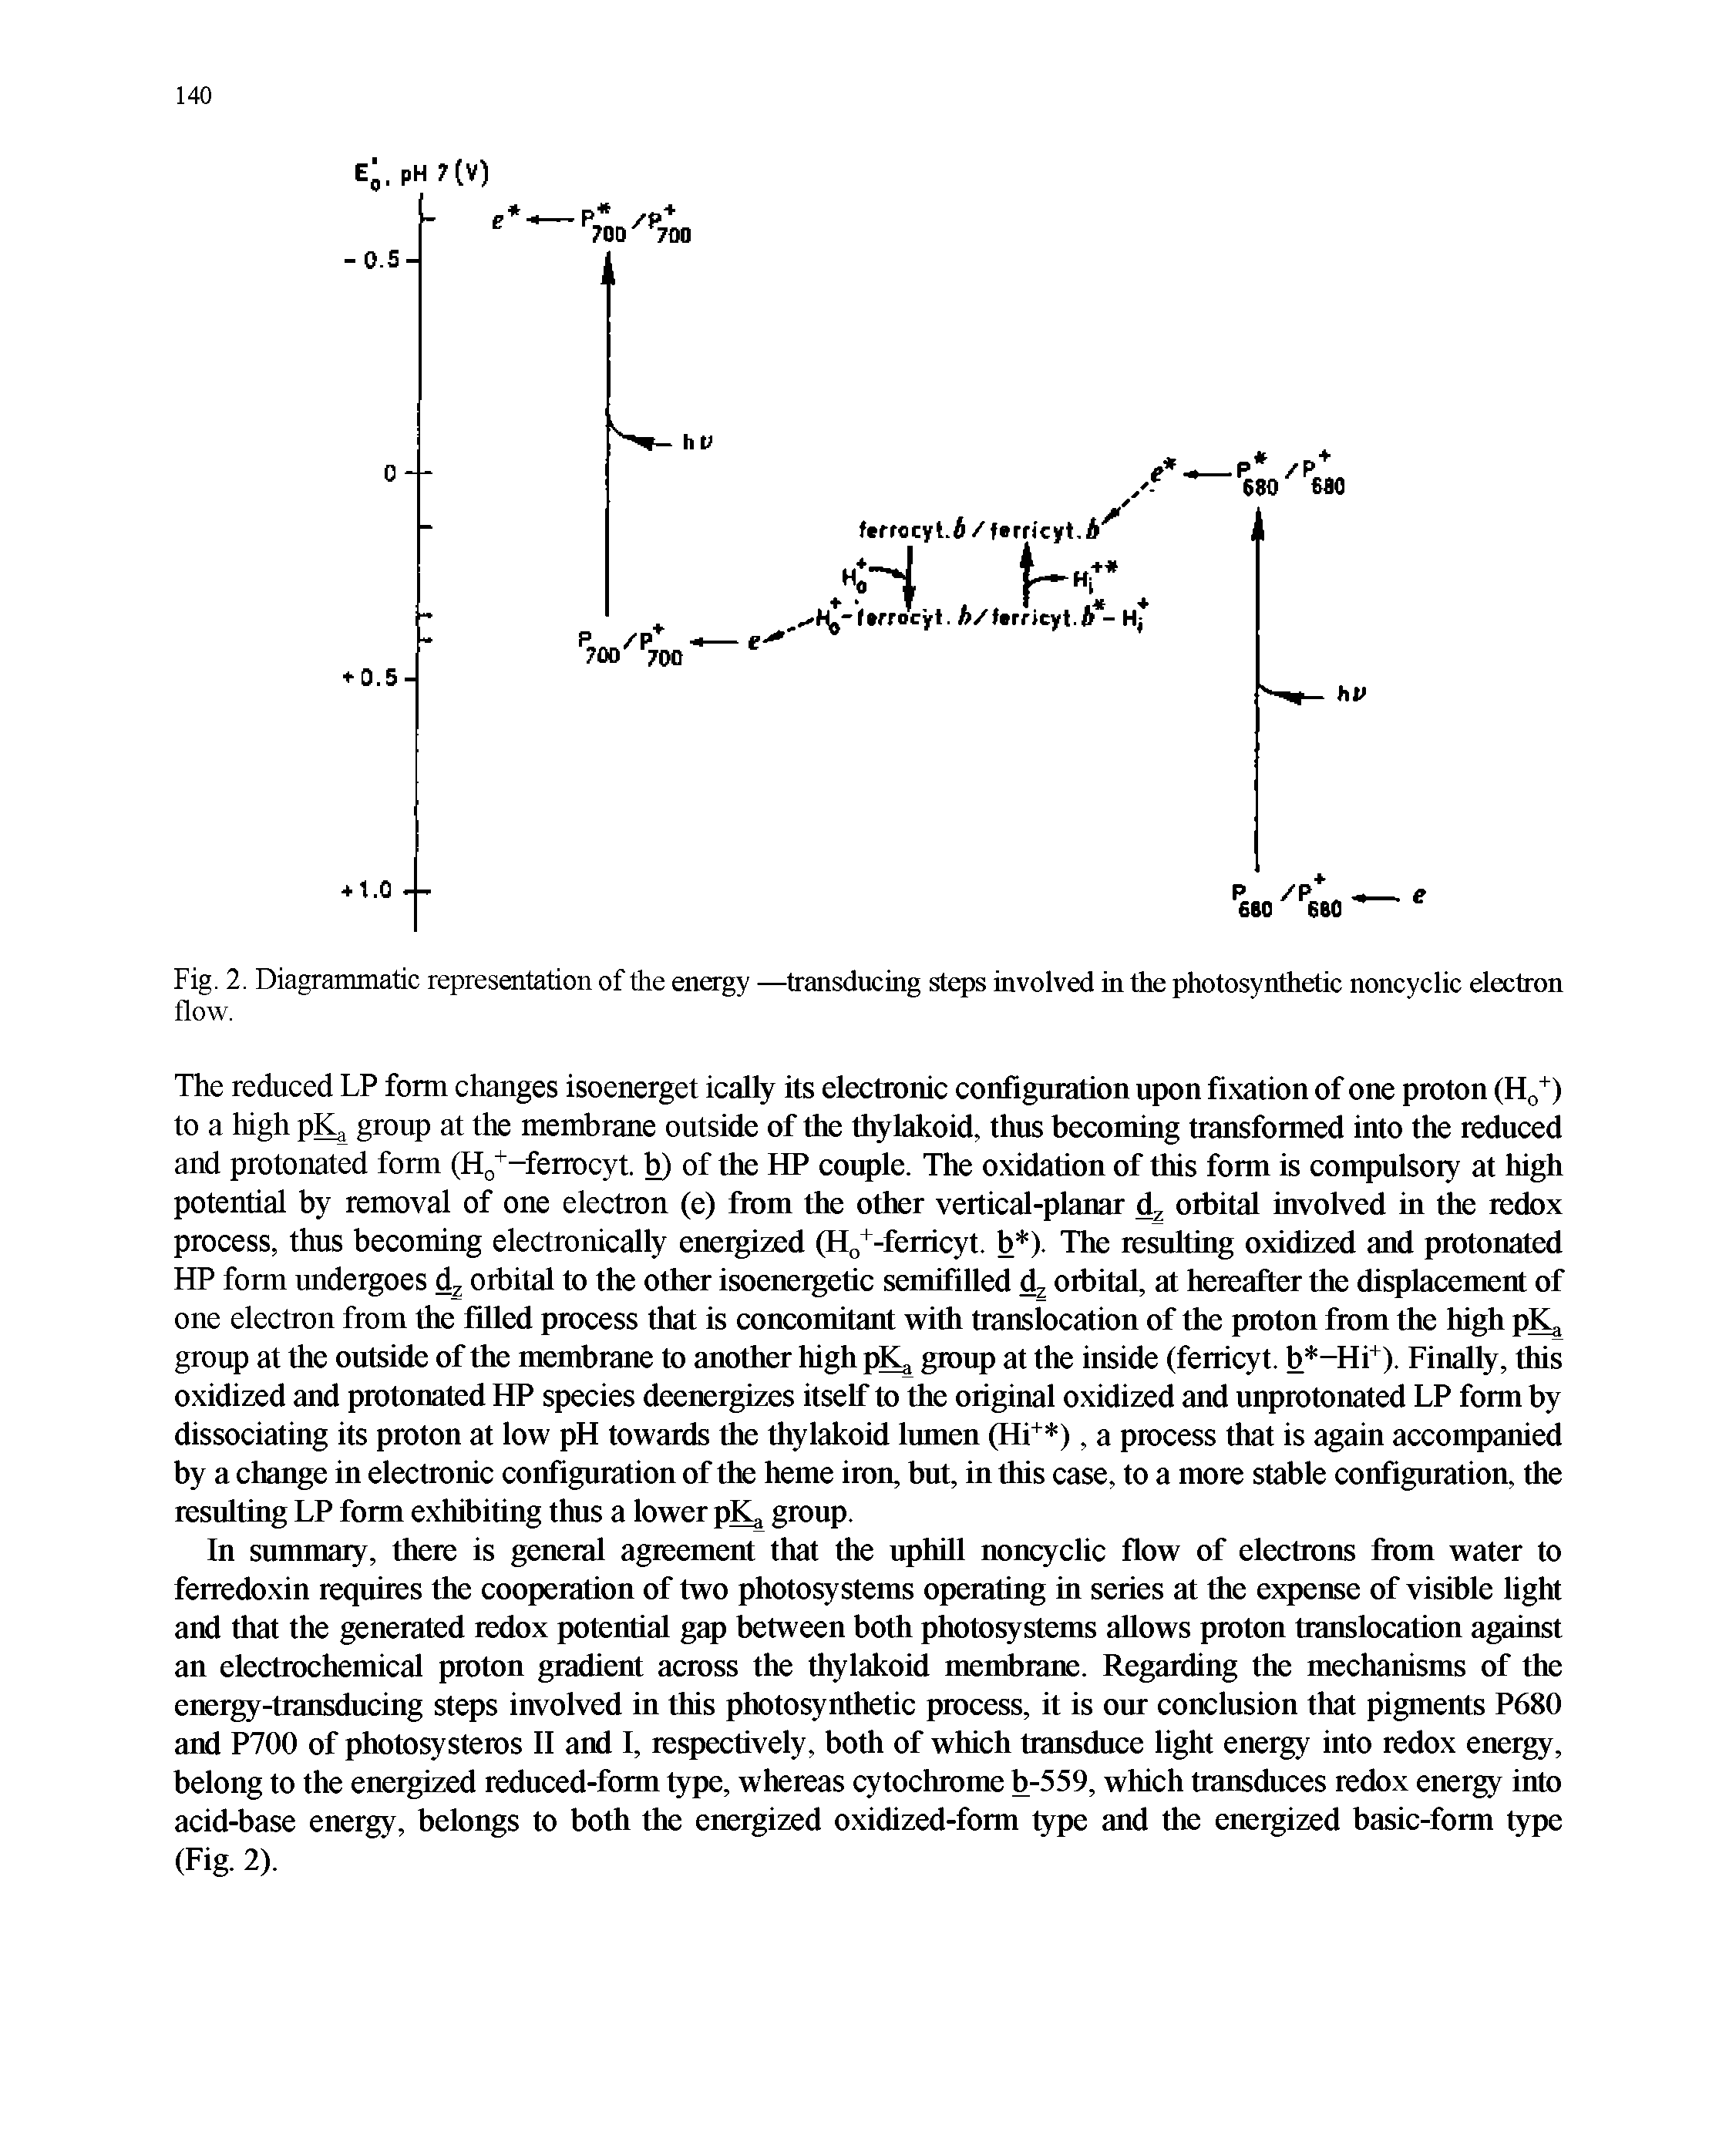 Fig. 2. Diagrammatic representation of the energy —transducing steps involved in the photosynthetic noncyclic electron flow.